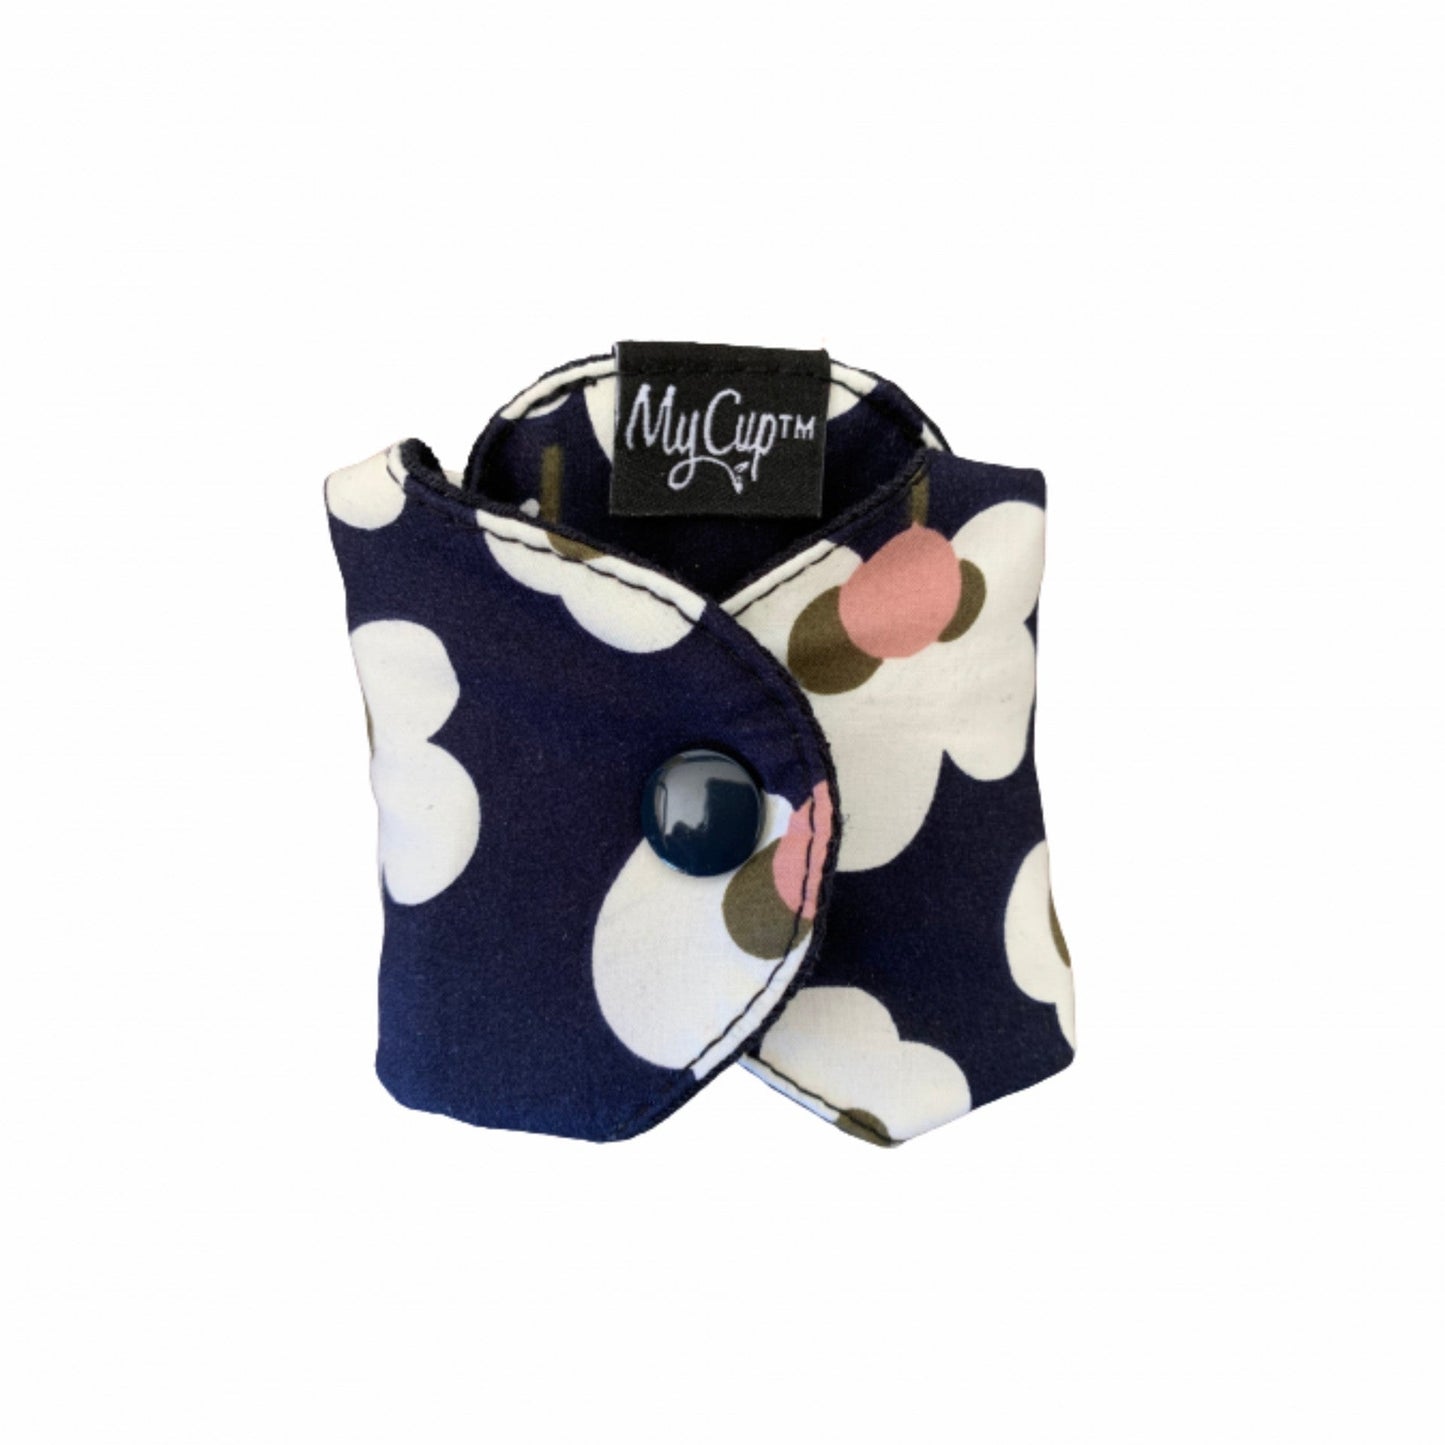 MyCup™ Reusable Super Pad